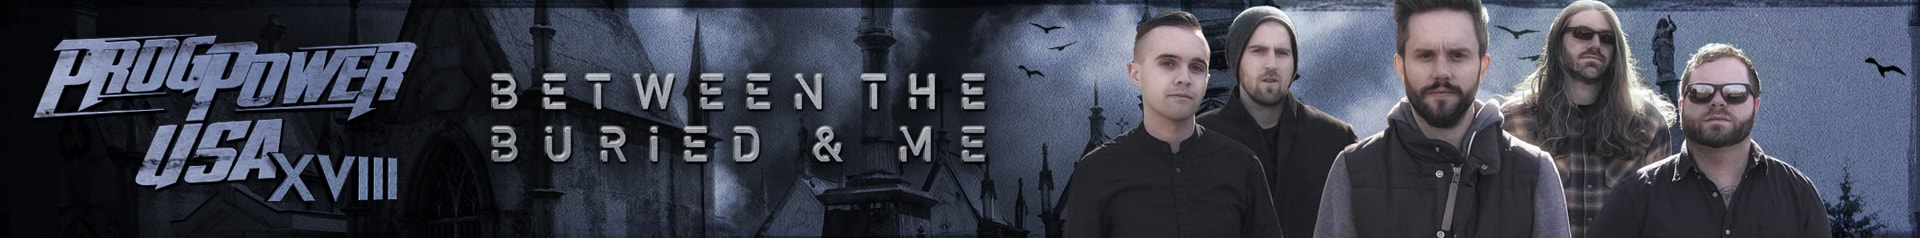 Between The Buried And Me Web Banner